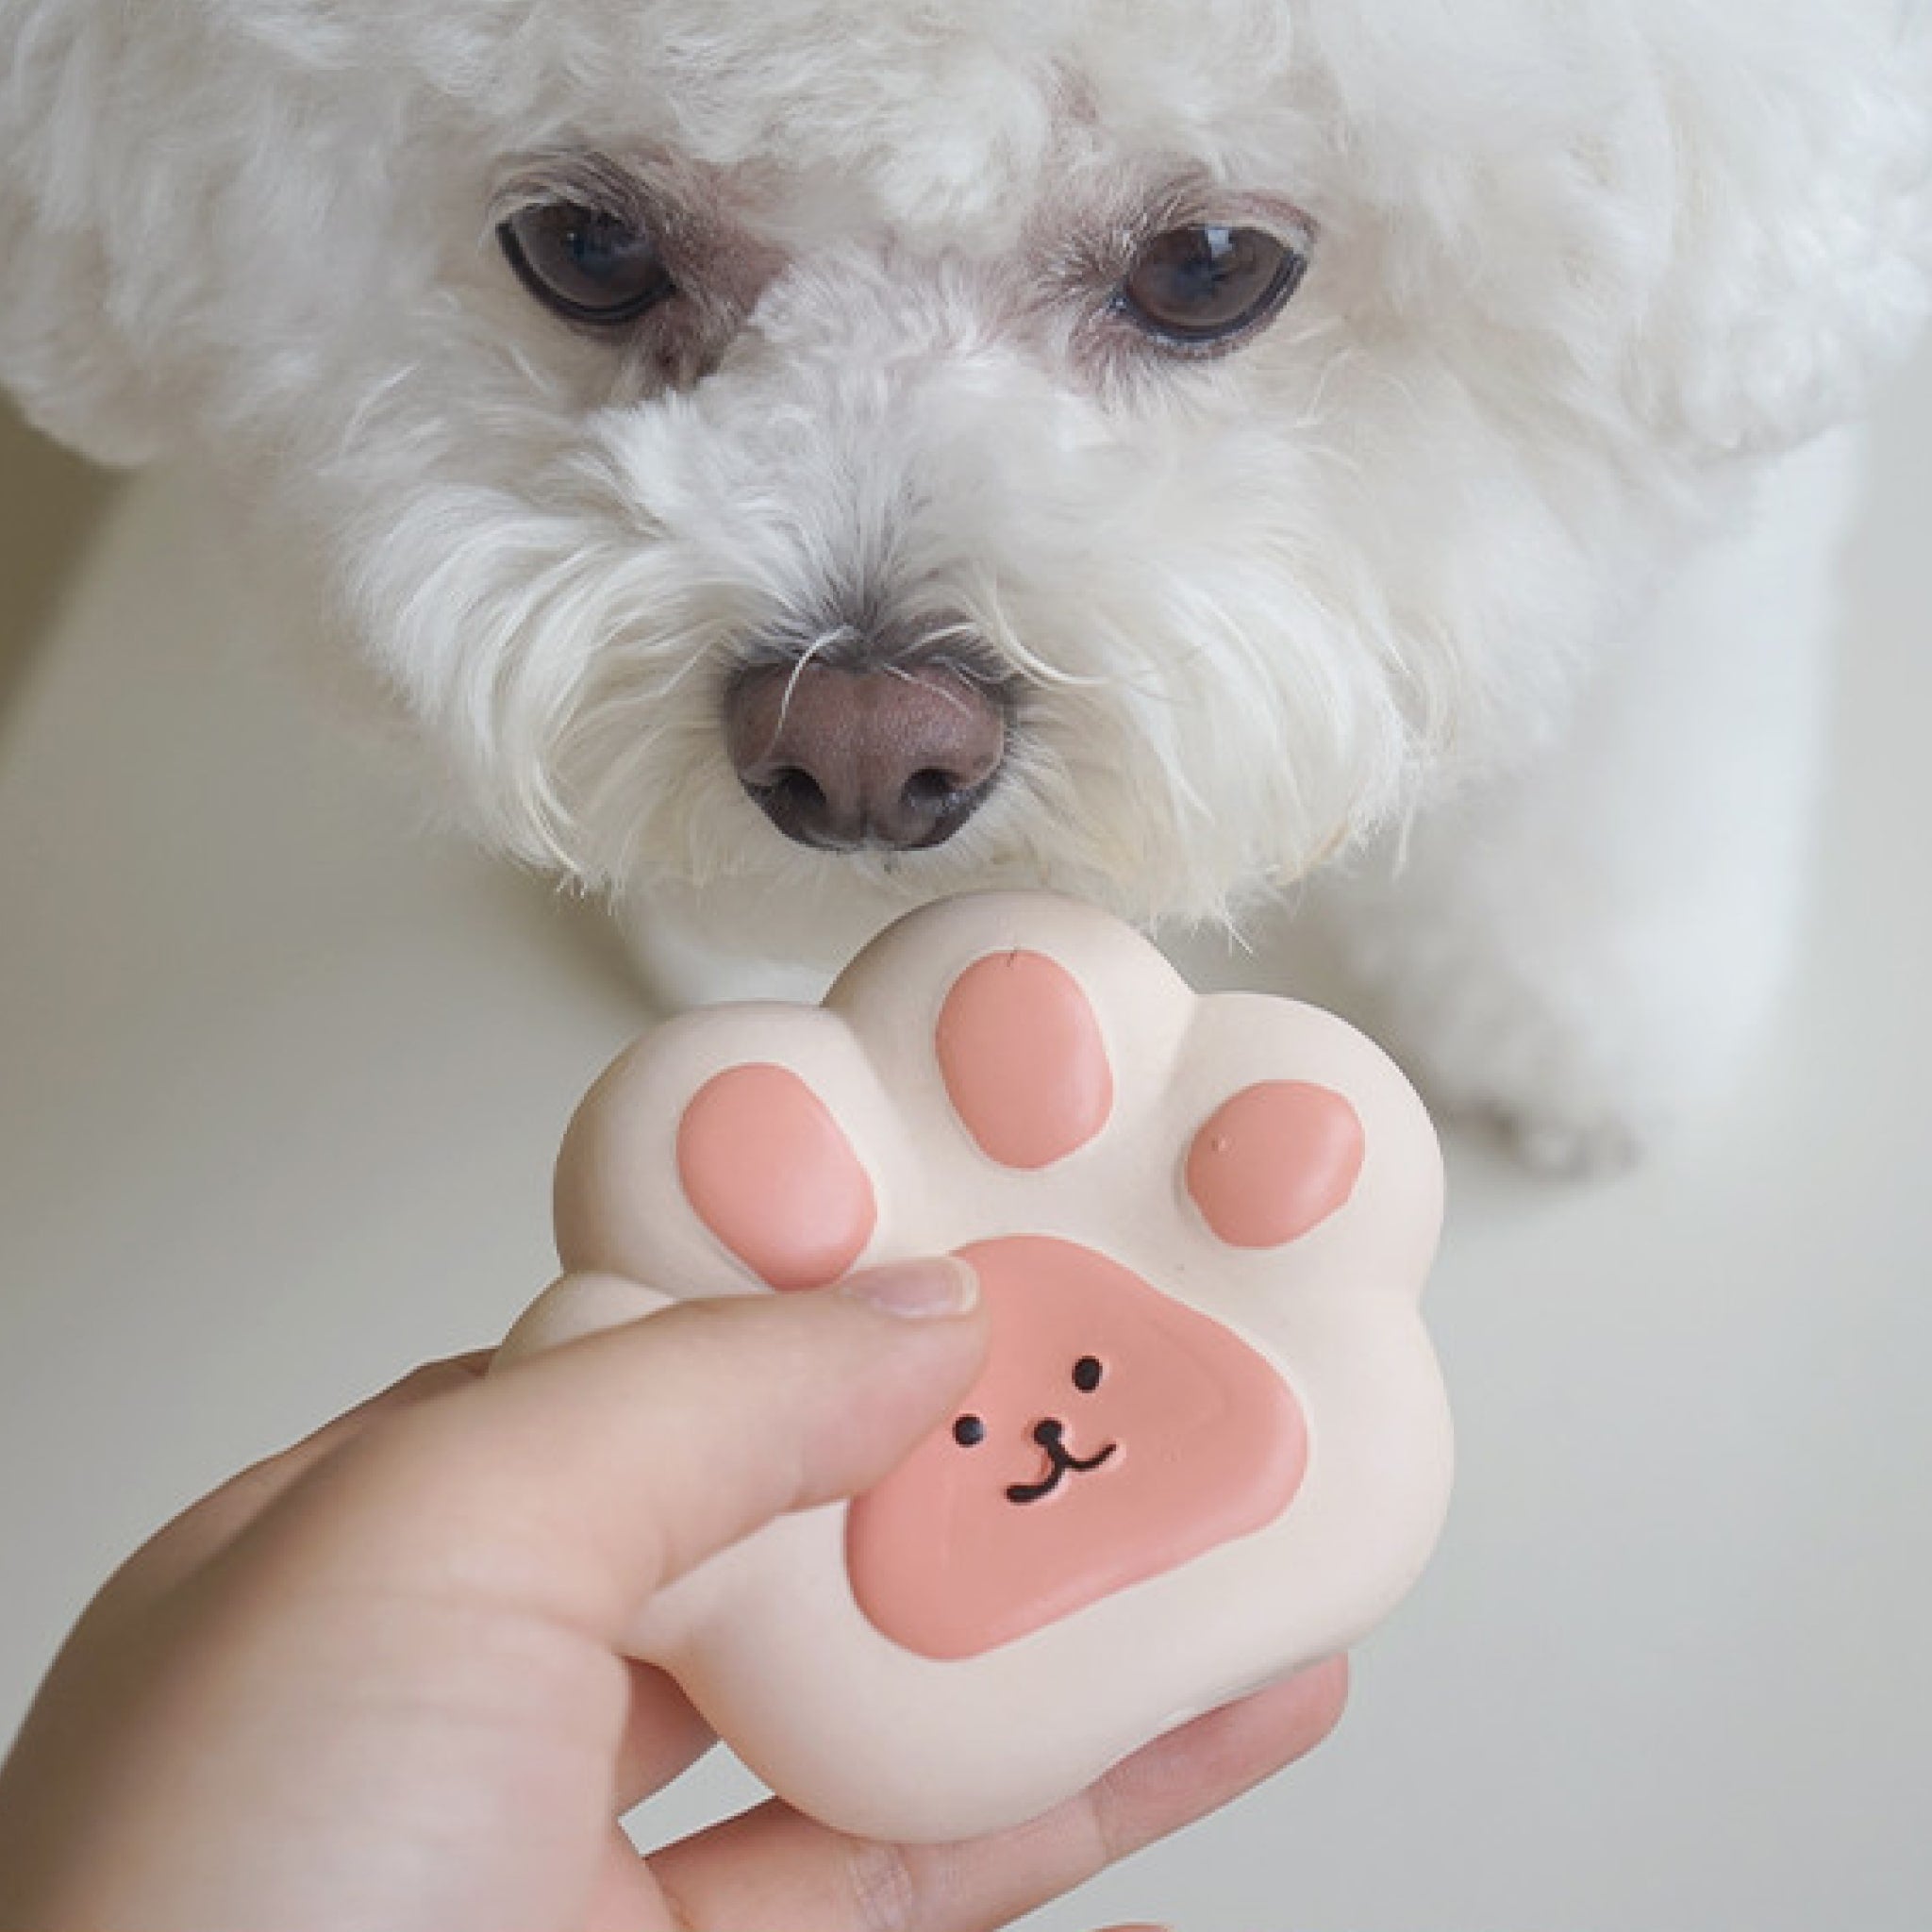 dog sniffing the jelly paw toy